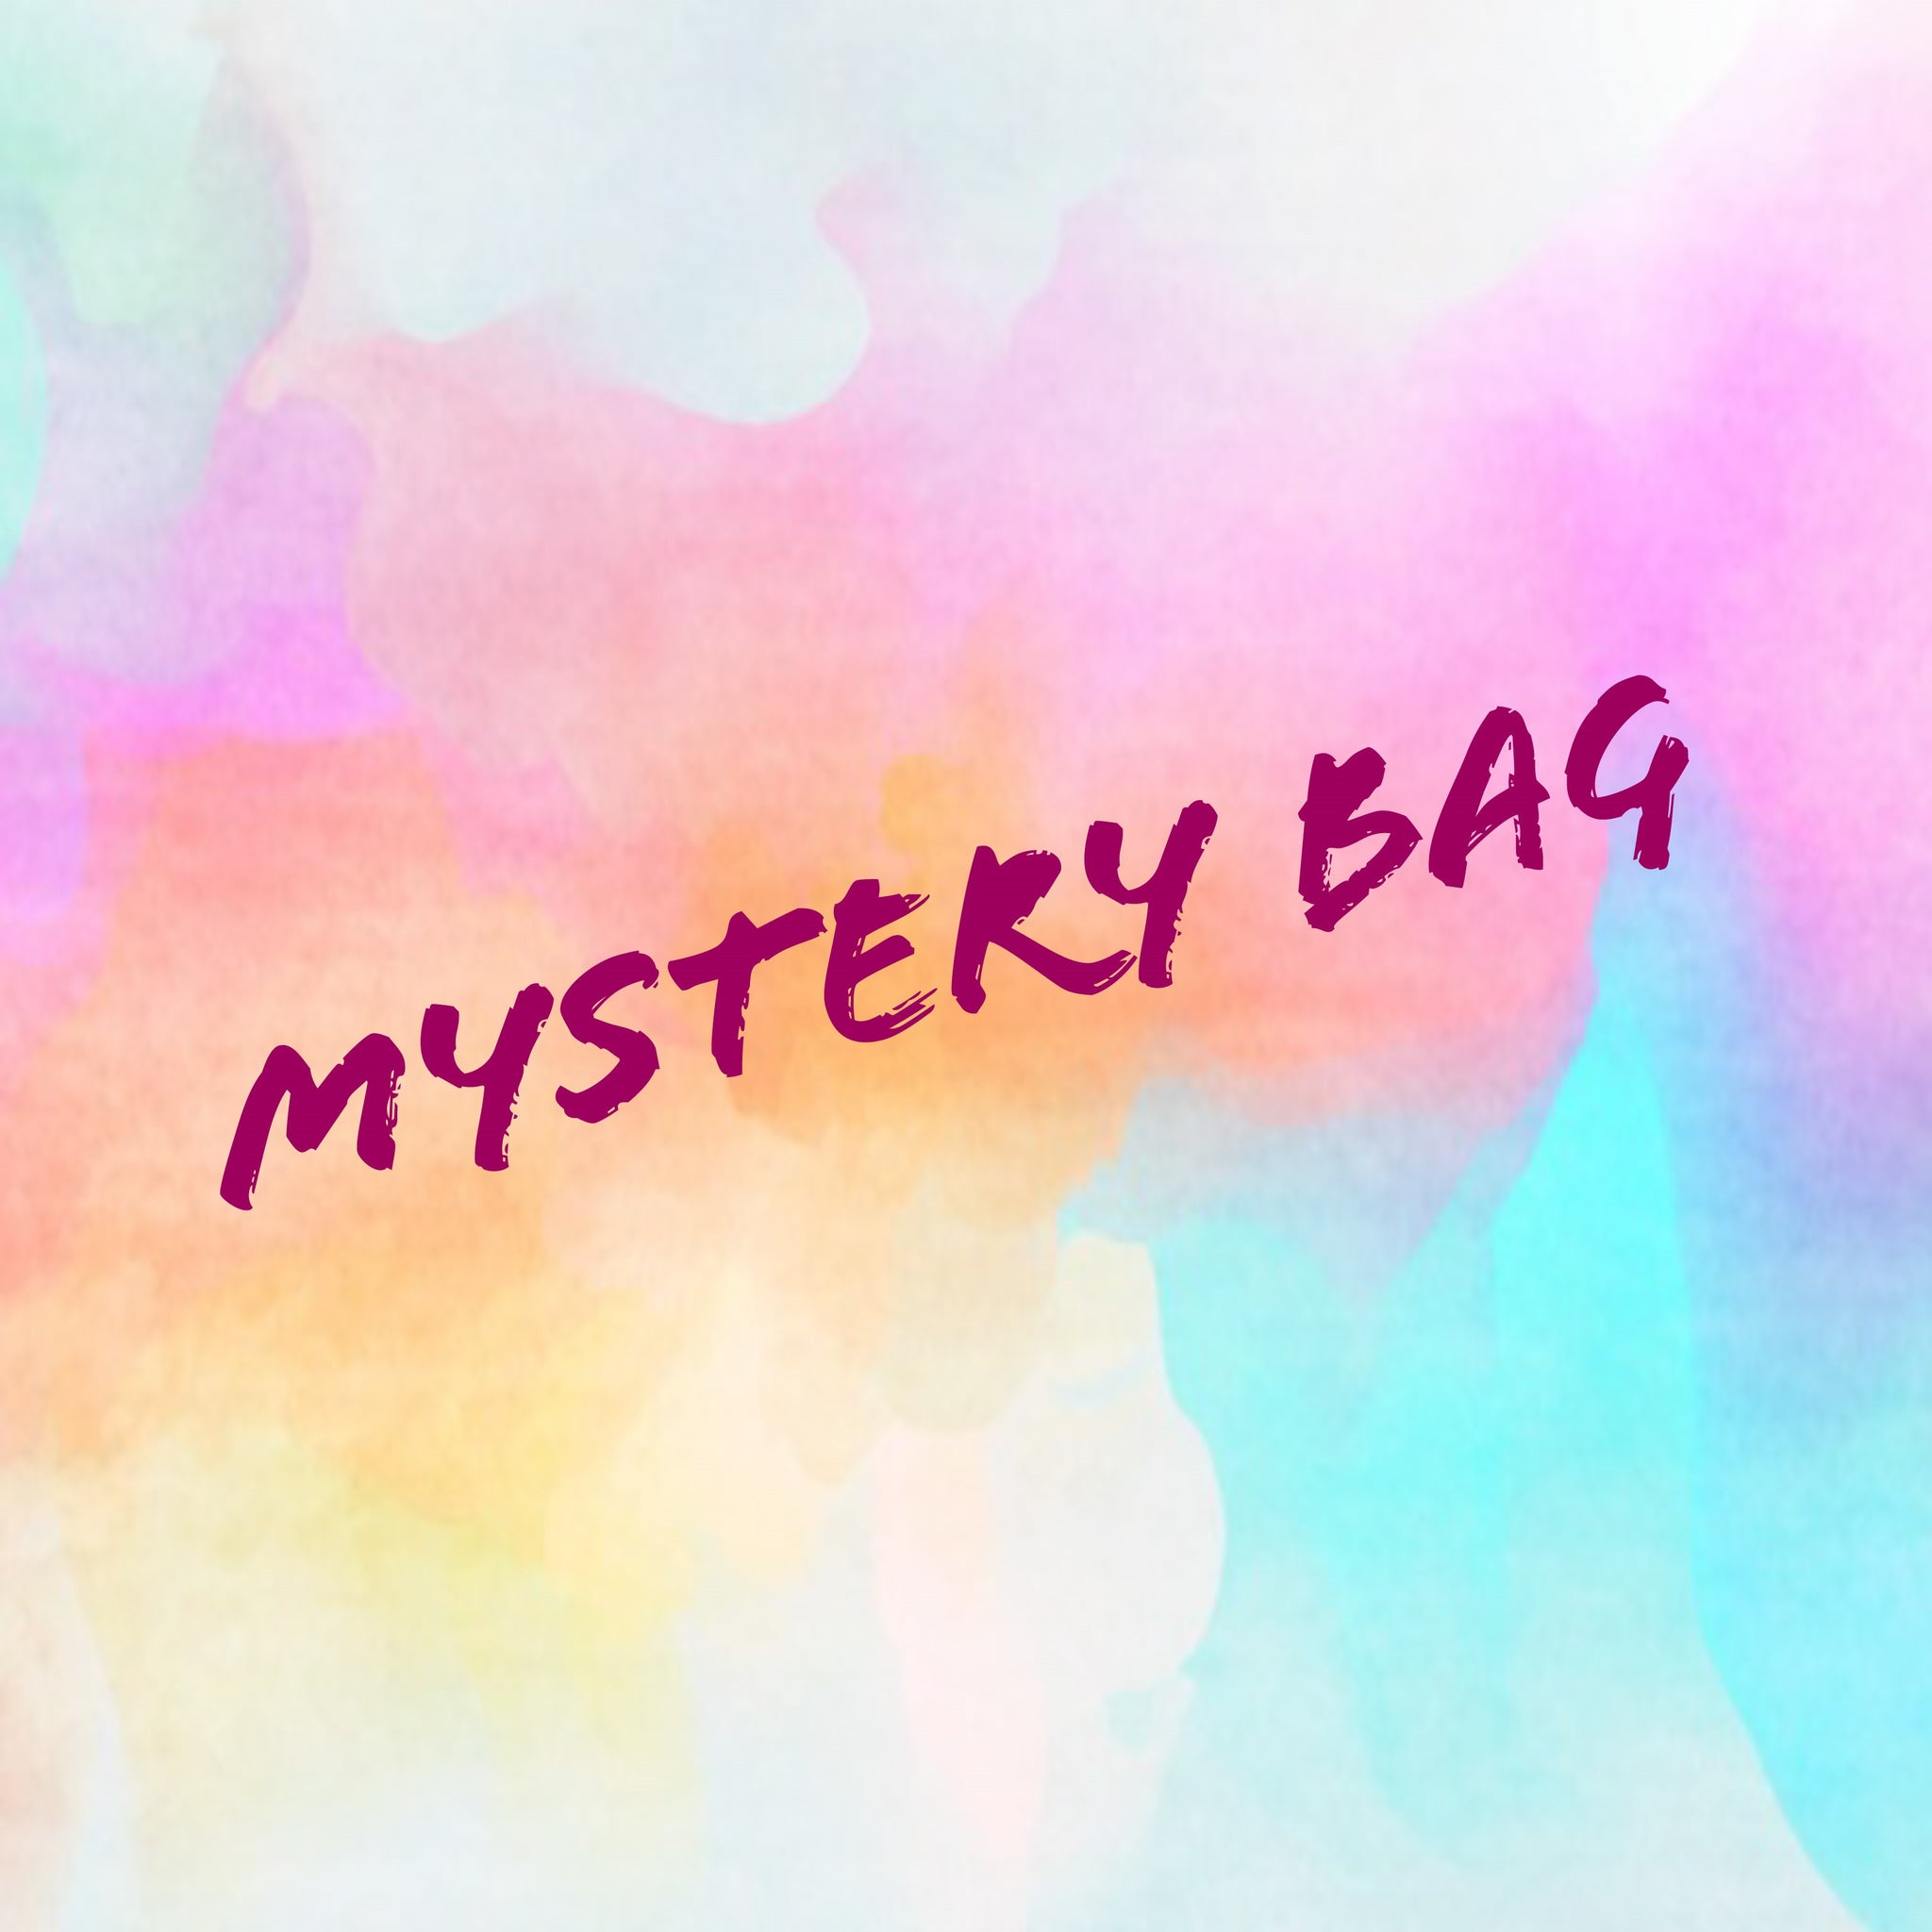 Mystery Bags